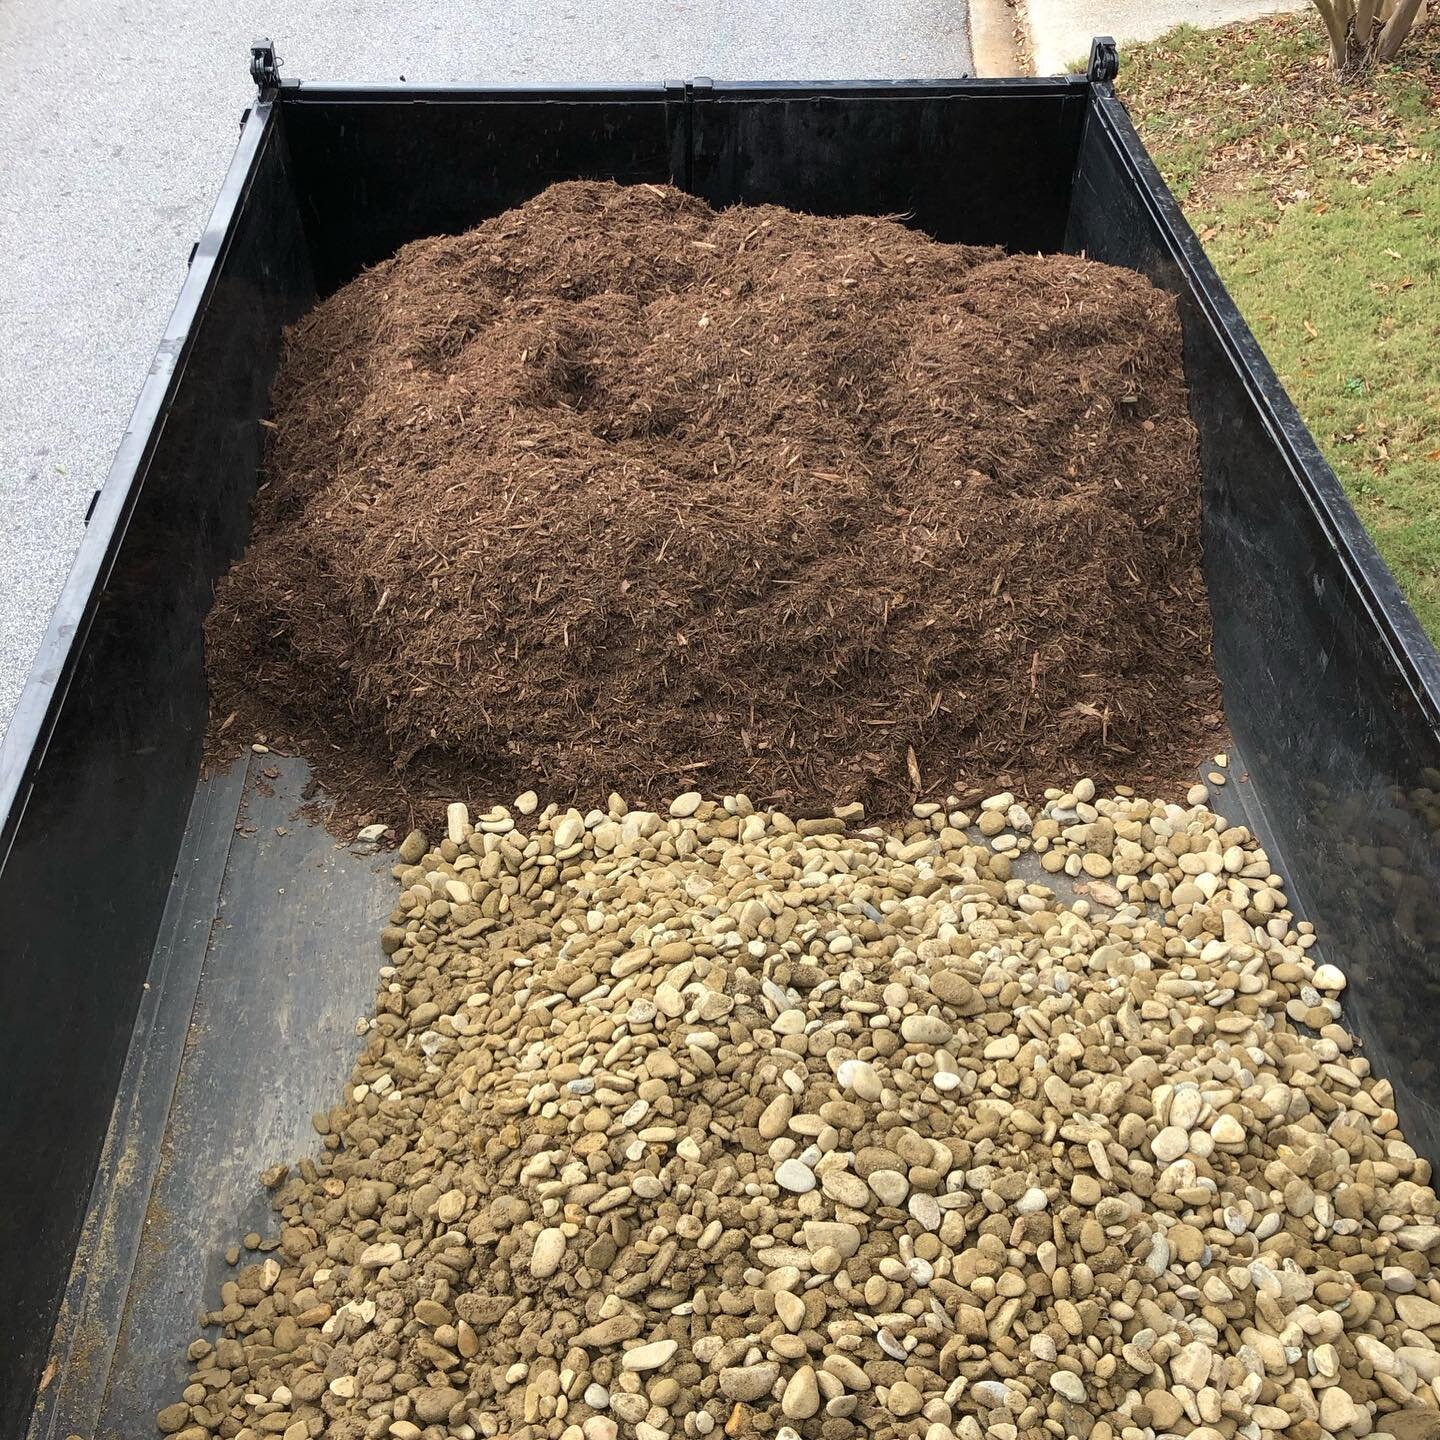 LANDSCAPE INSTALL:

Some fresh mulch and fresh rock to start your Friday. Who&rsquo;s ready for spring?